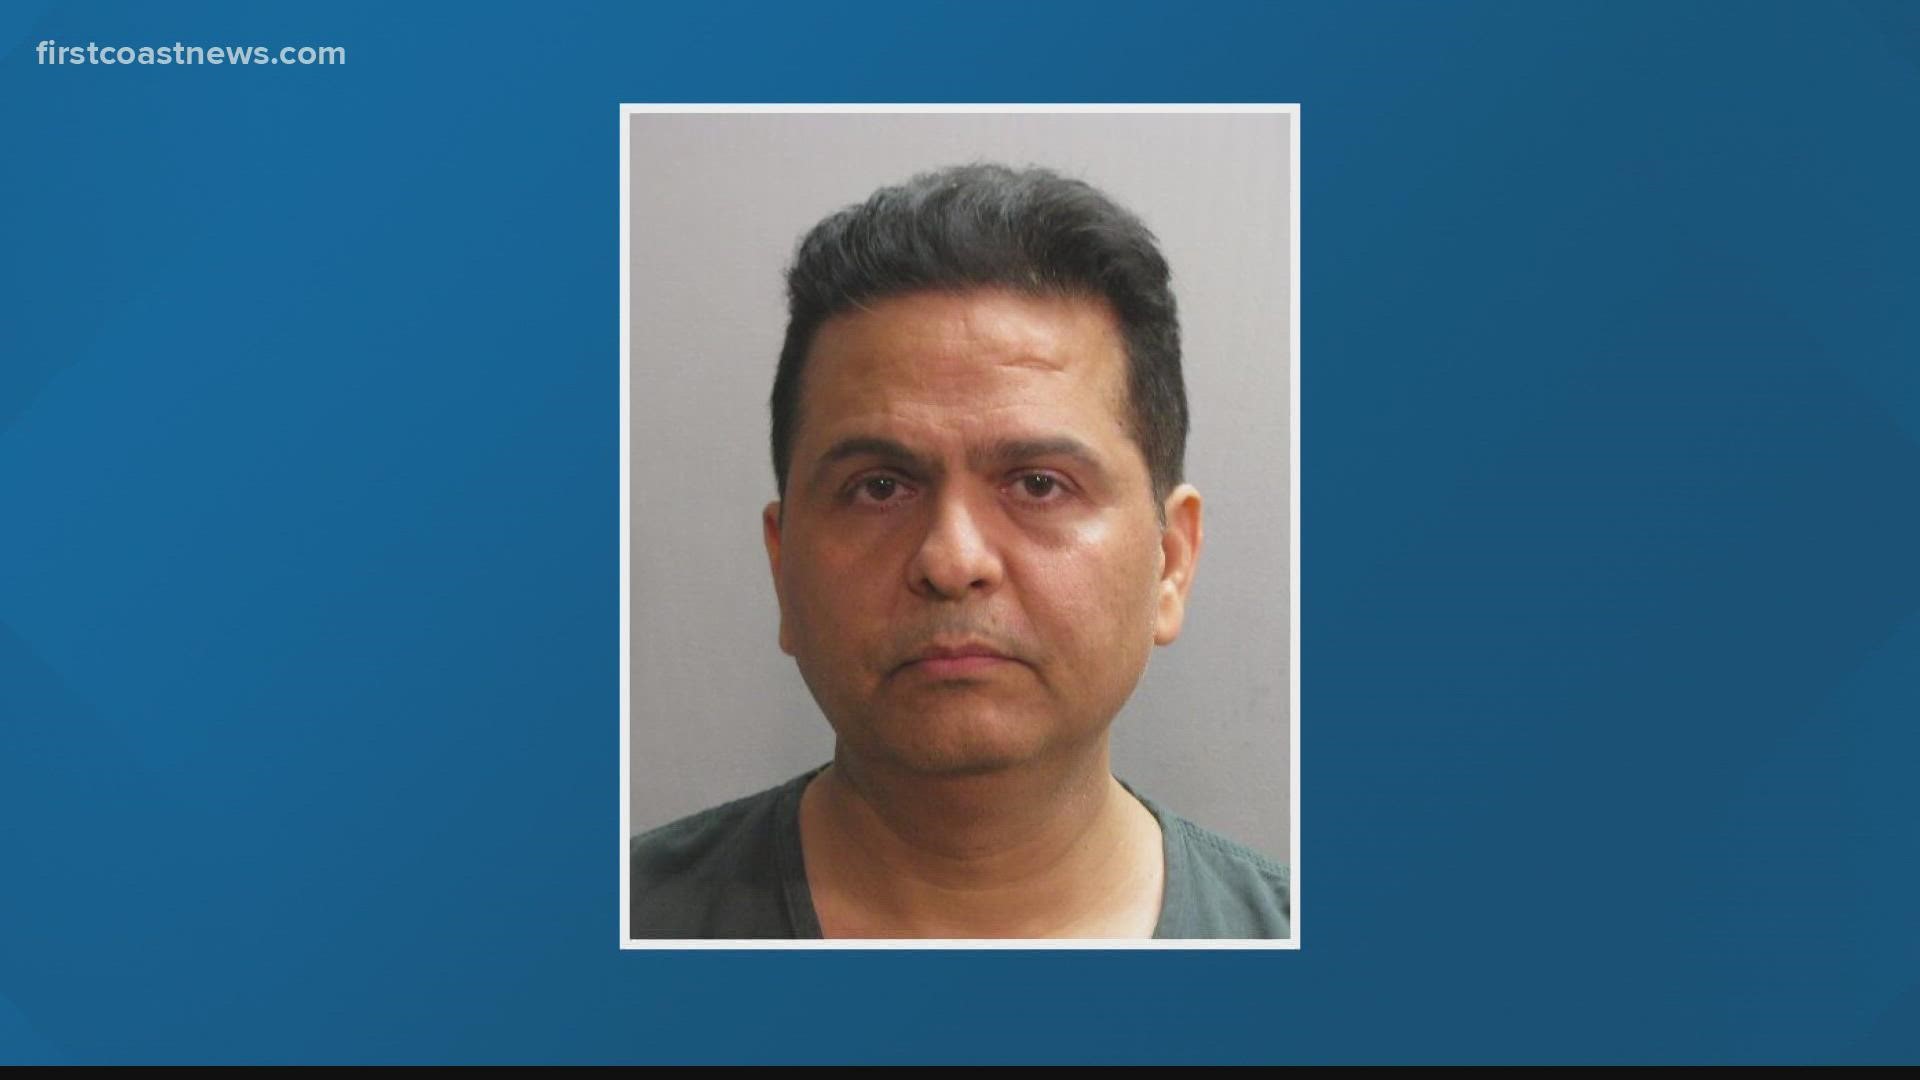 Om Parkash Kapoor, a former Baptist Health doctor, was found guilty last month of exposing himself during a medical exam in 2017.